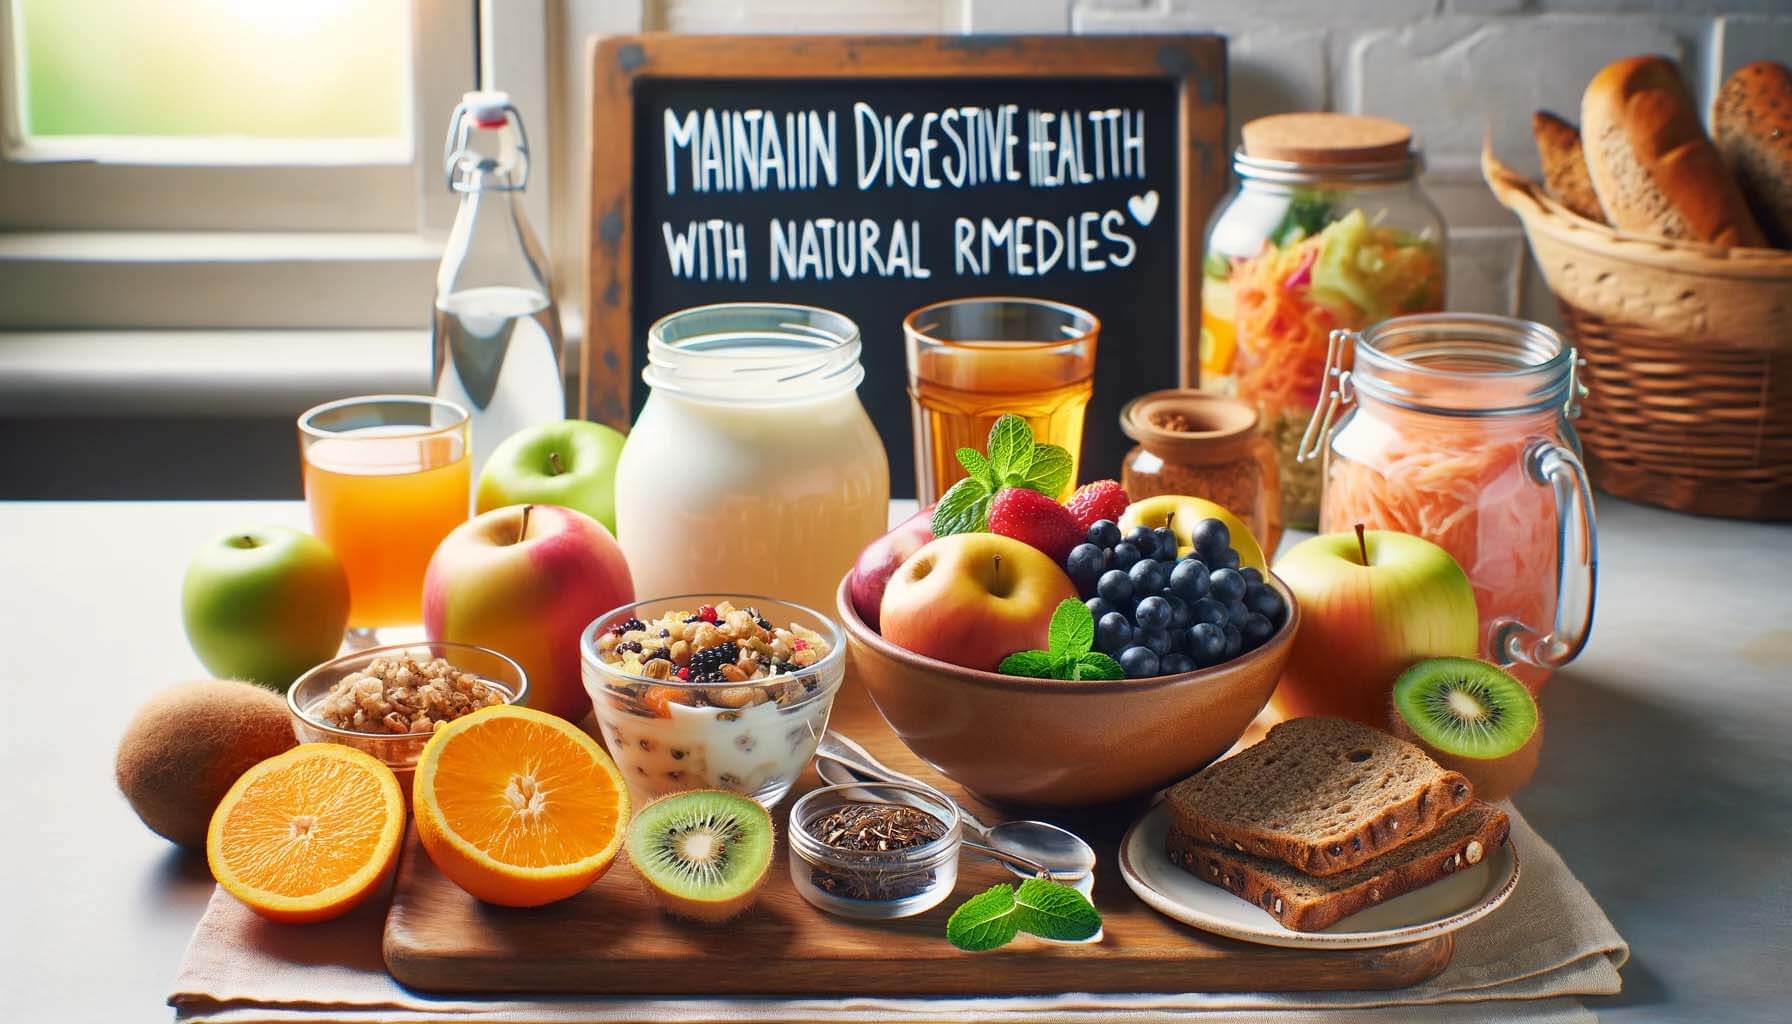 How to Maintain Digestive Health with Natural Remedies